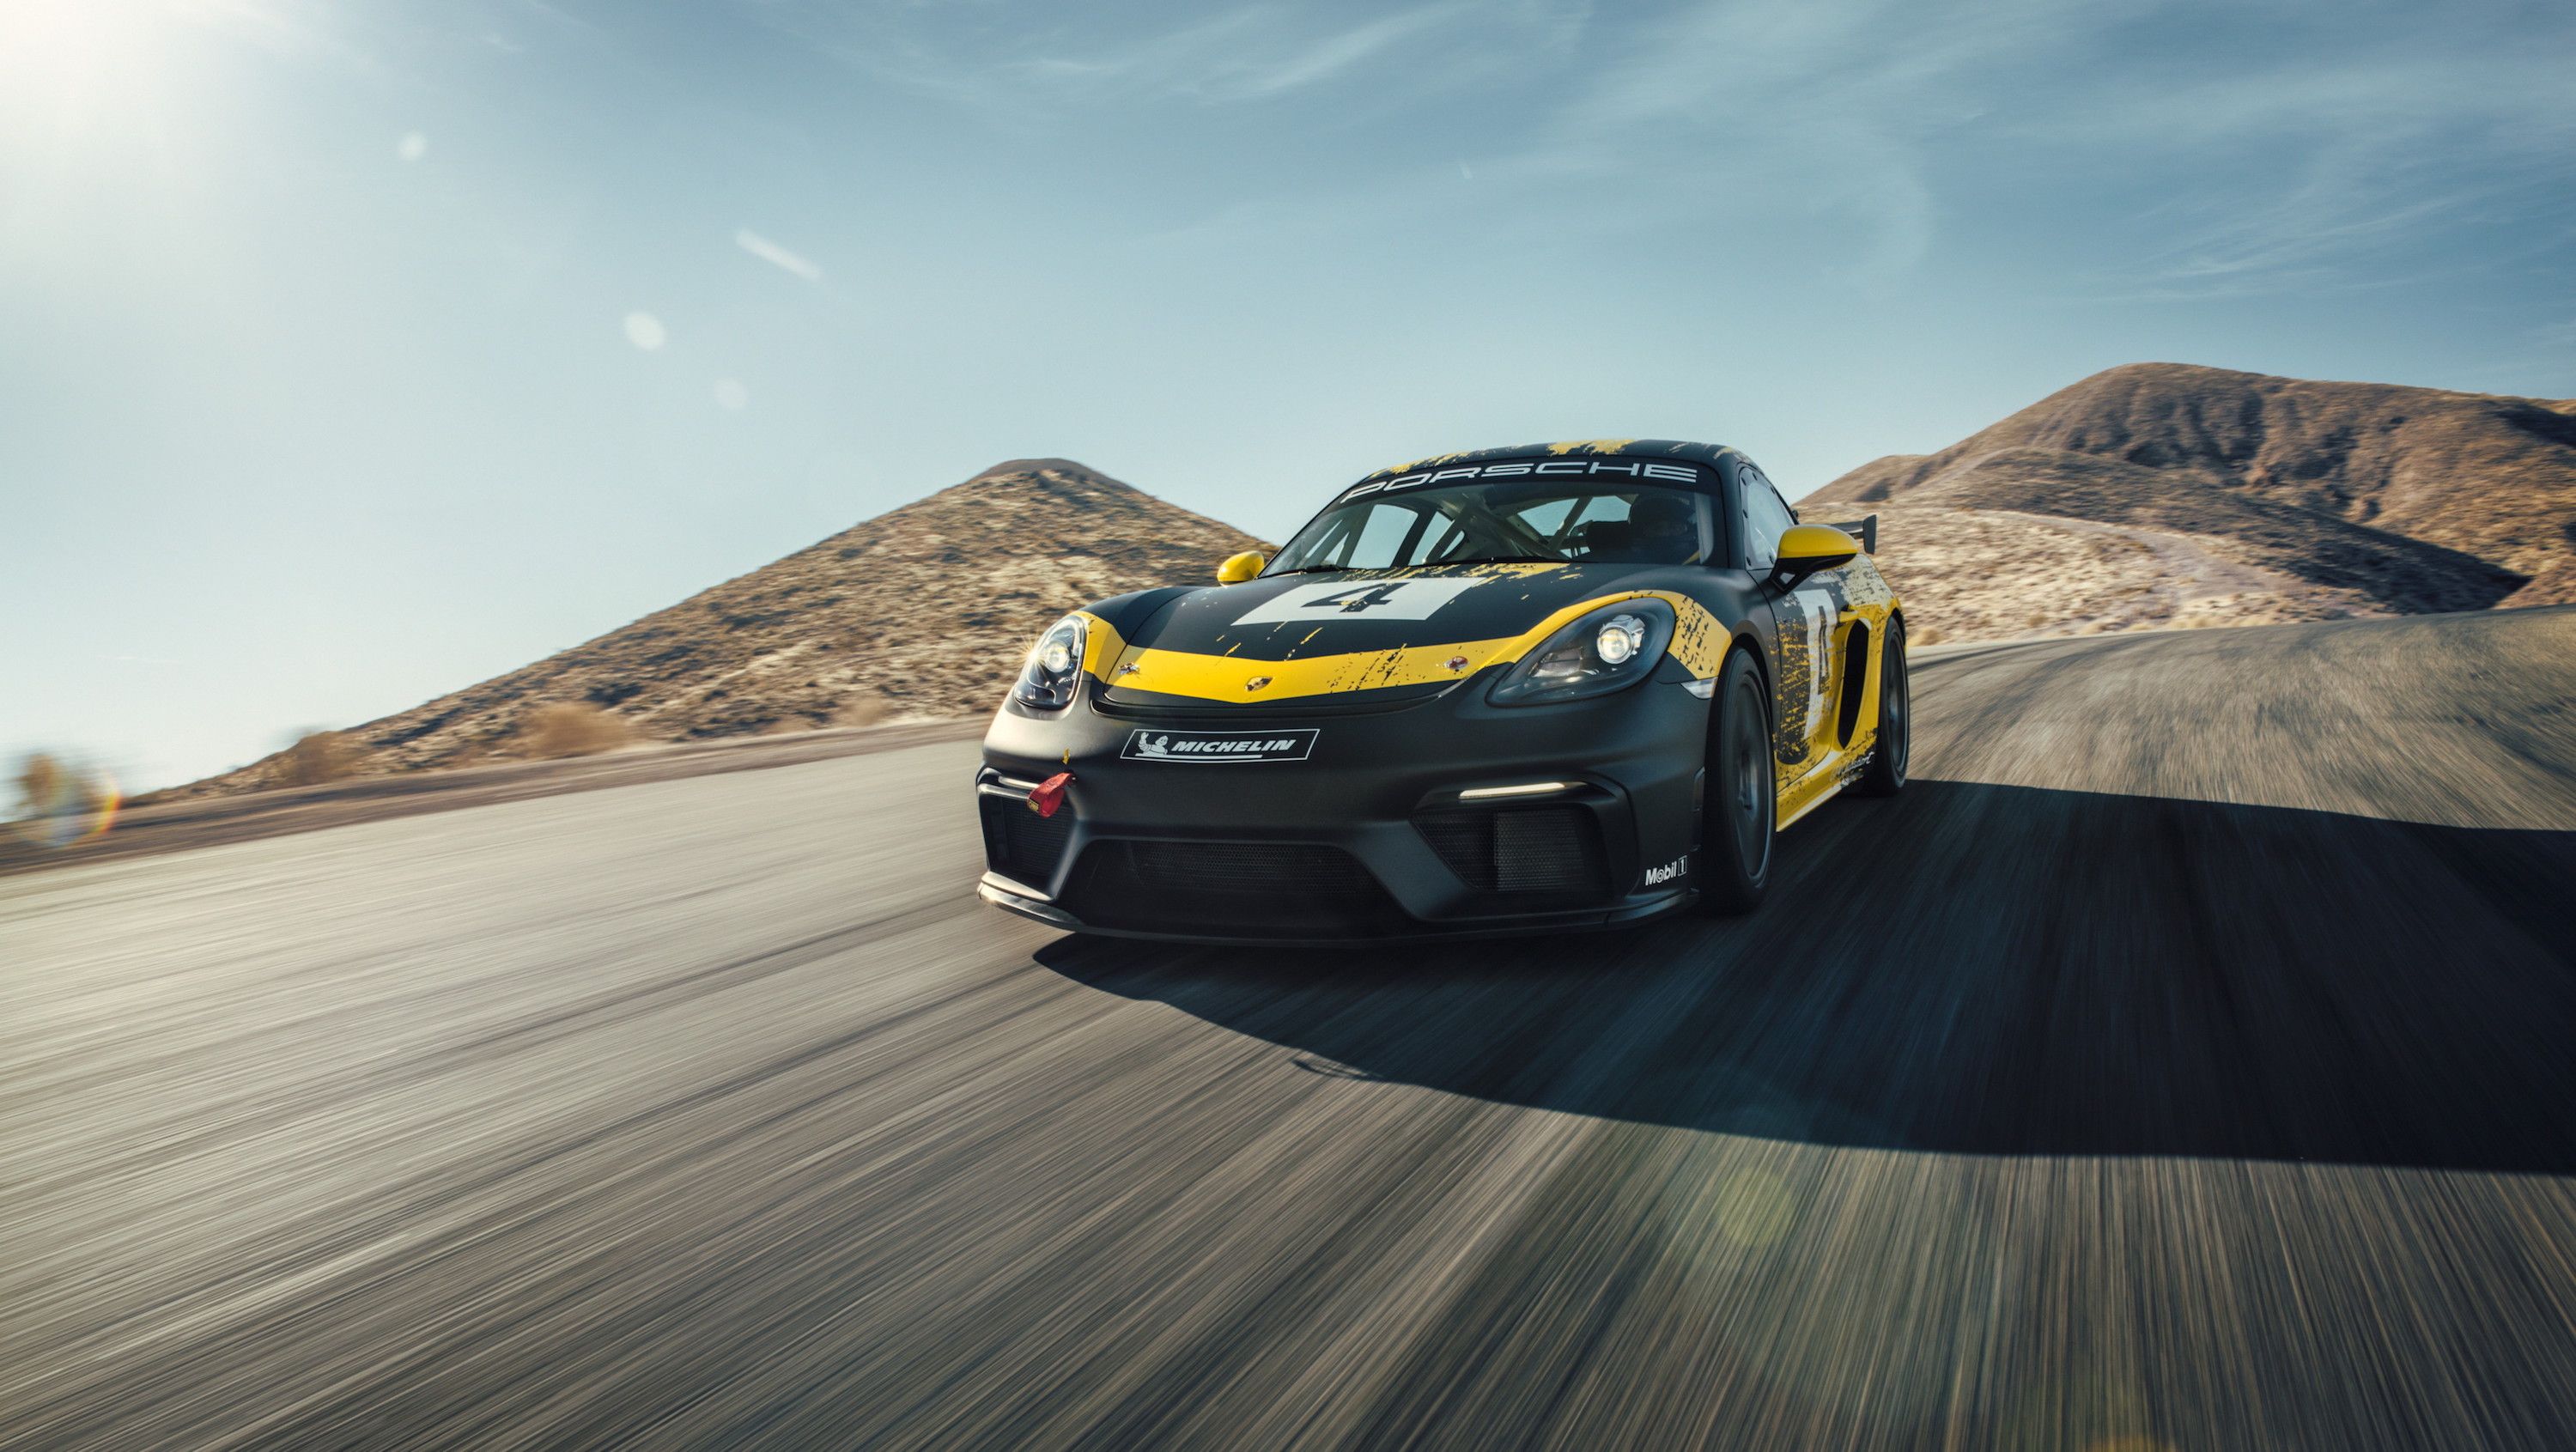 2019 The 2019 Porsche 718 Cayman GT4 Clubsport is Here and the German Competition Should be Scared